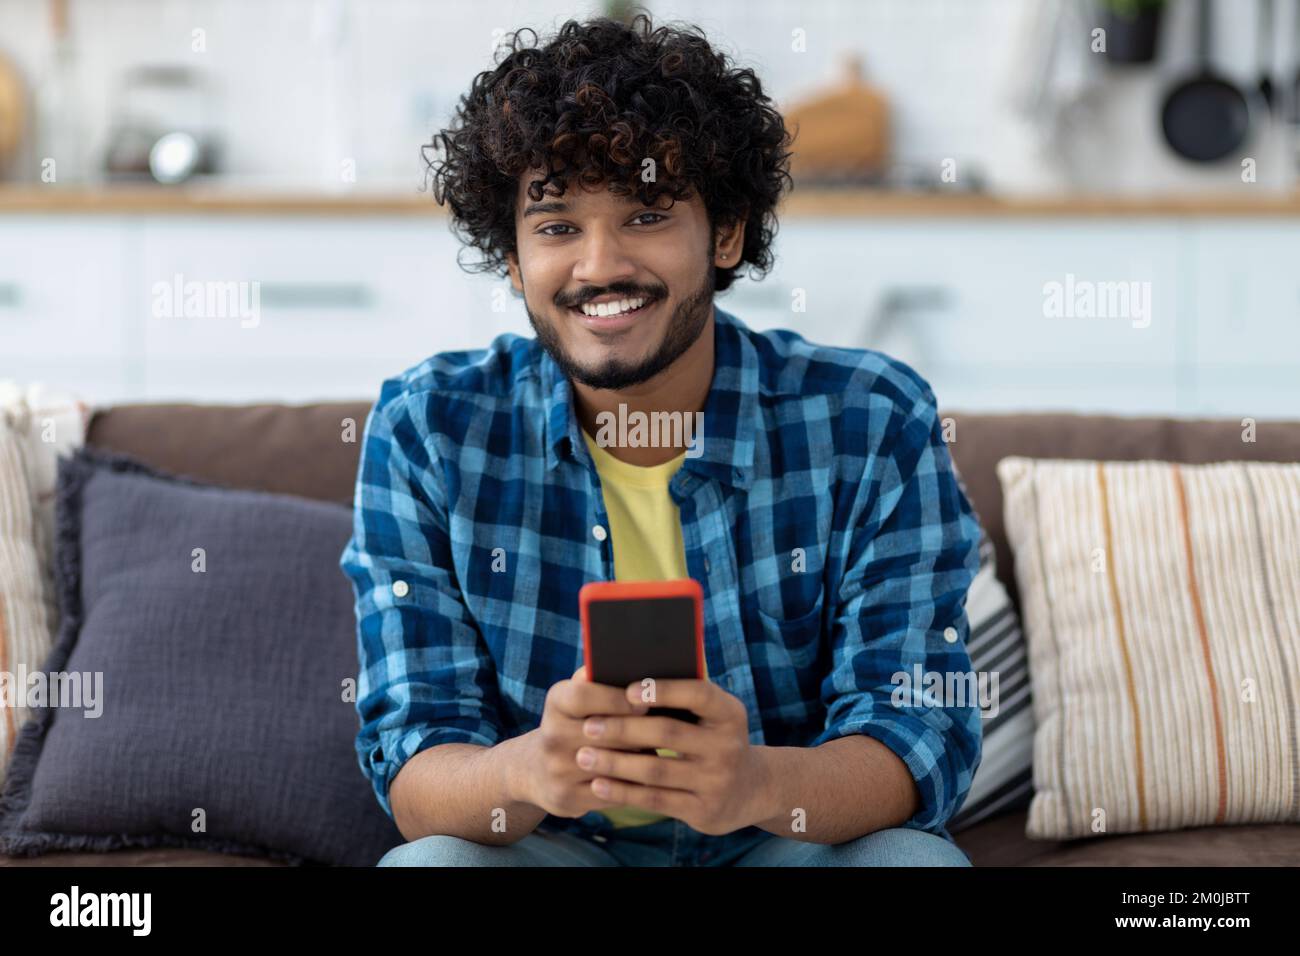 Asian man using mobile phone, chatting online sitting Indian male holding smartphone Stock Photo